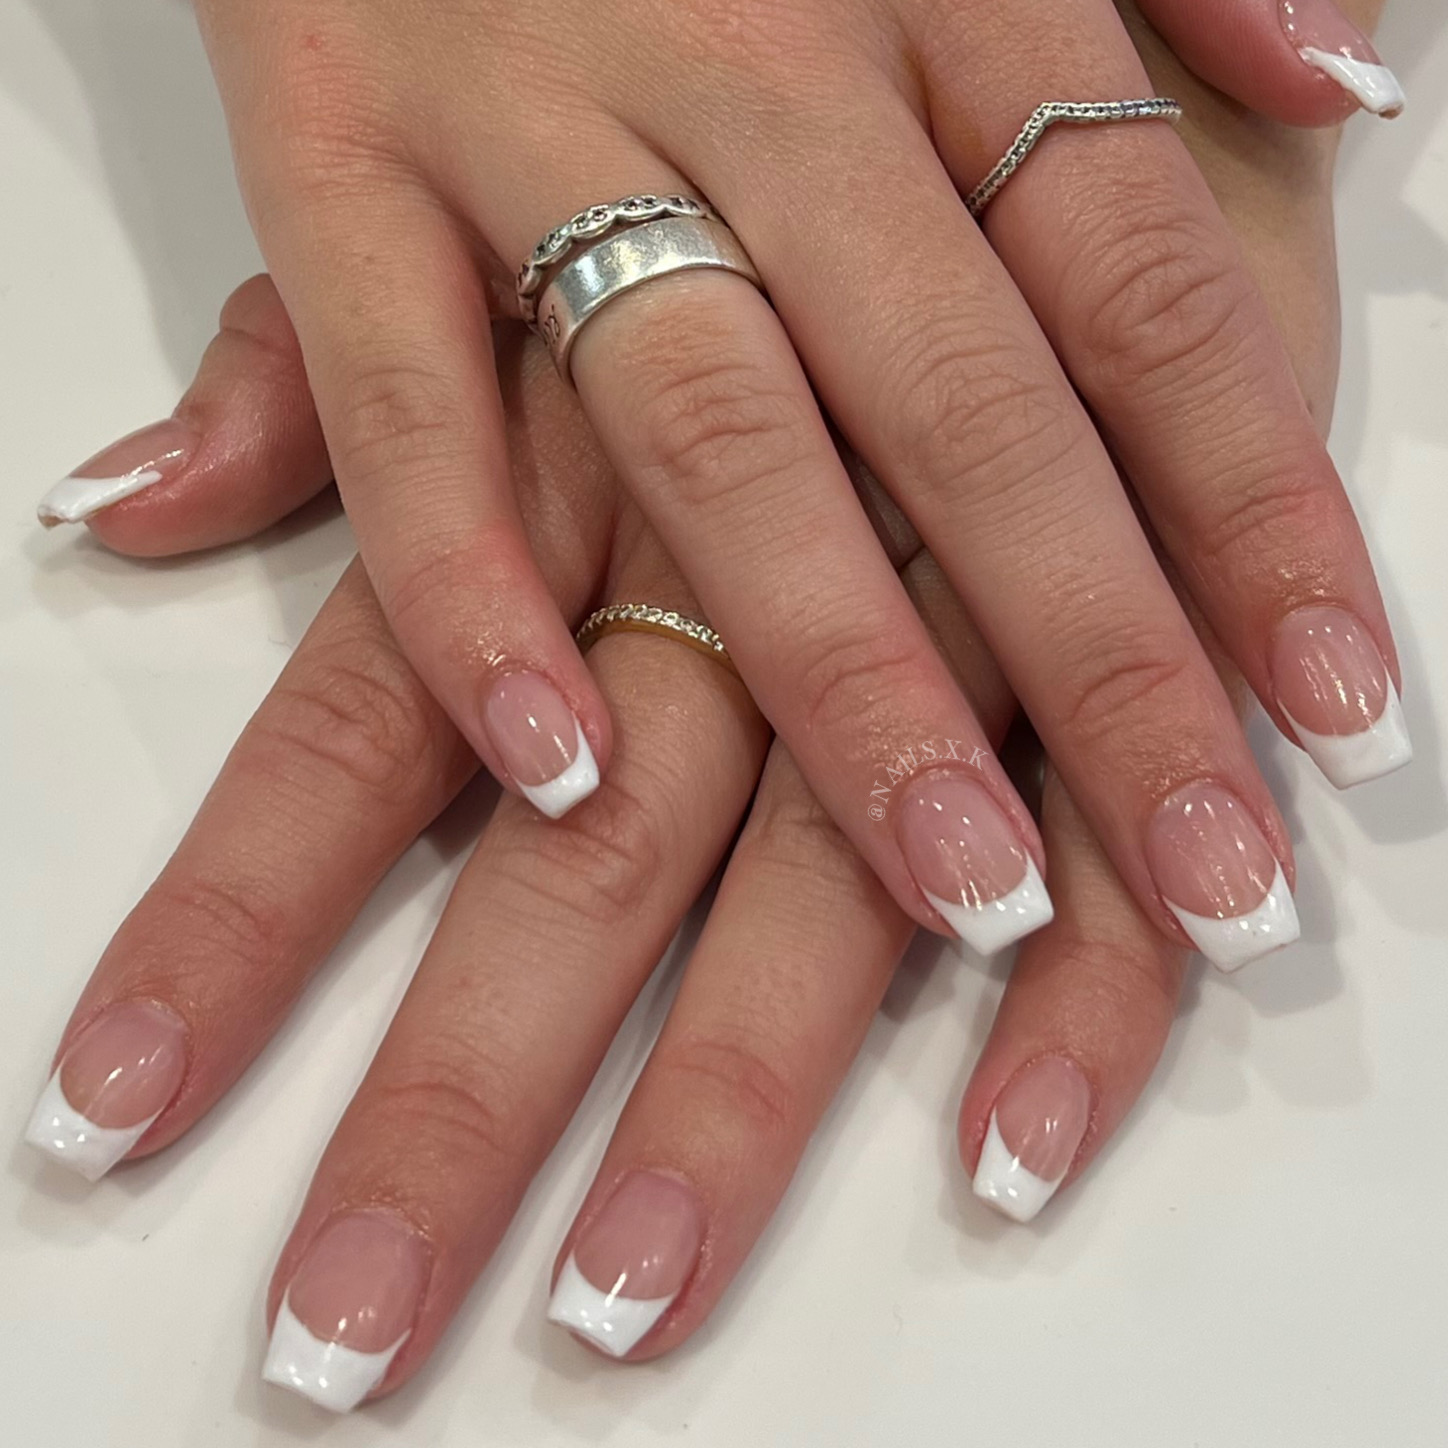 Acrylic overlay with the classic french tips. Nails by K